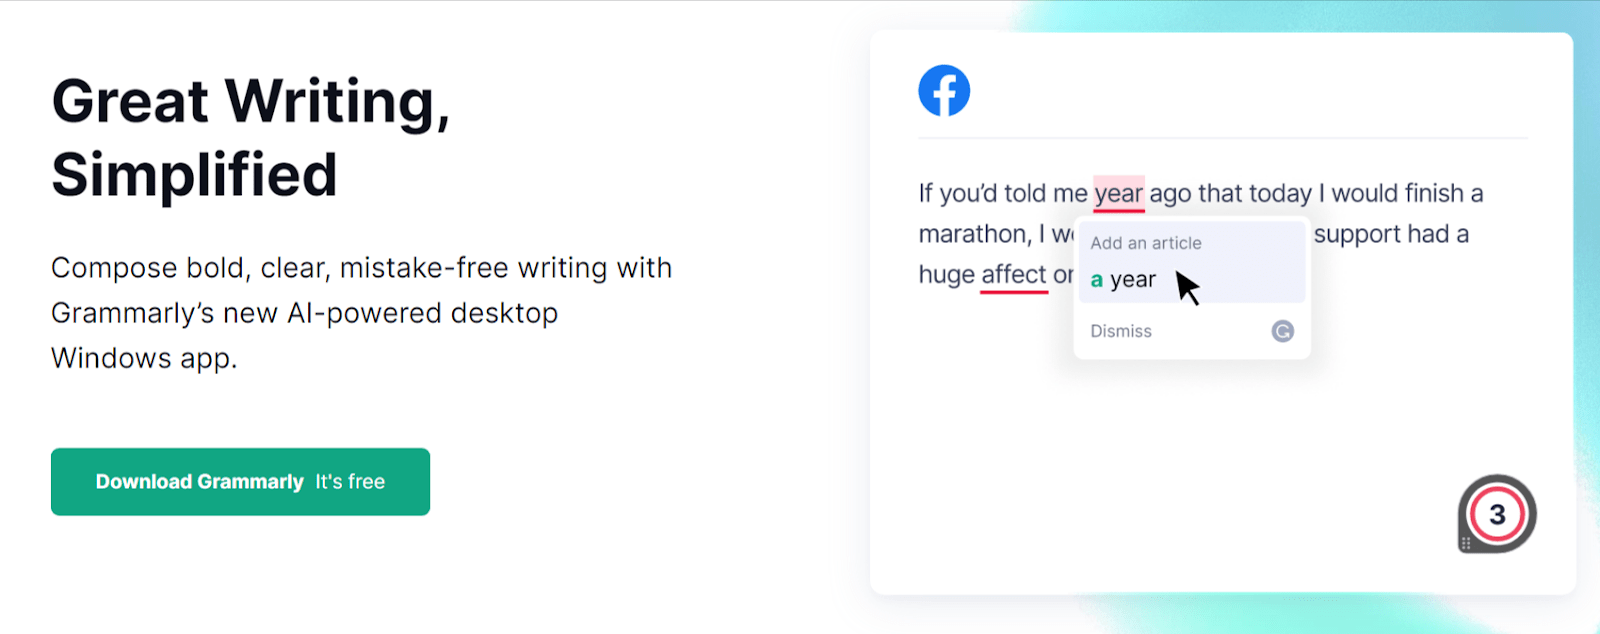 Grammarly's value proposition 